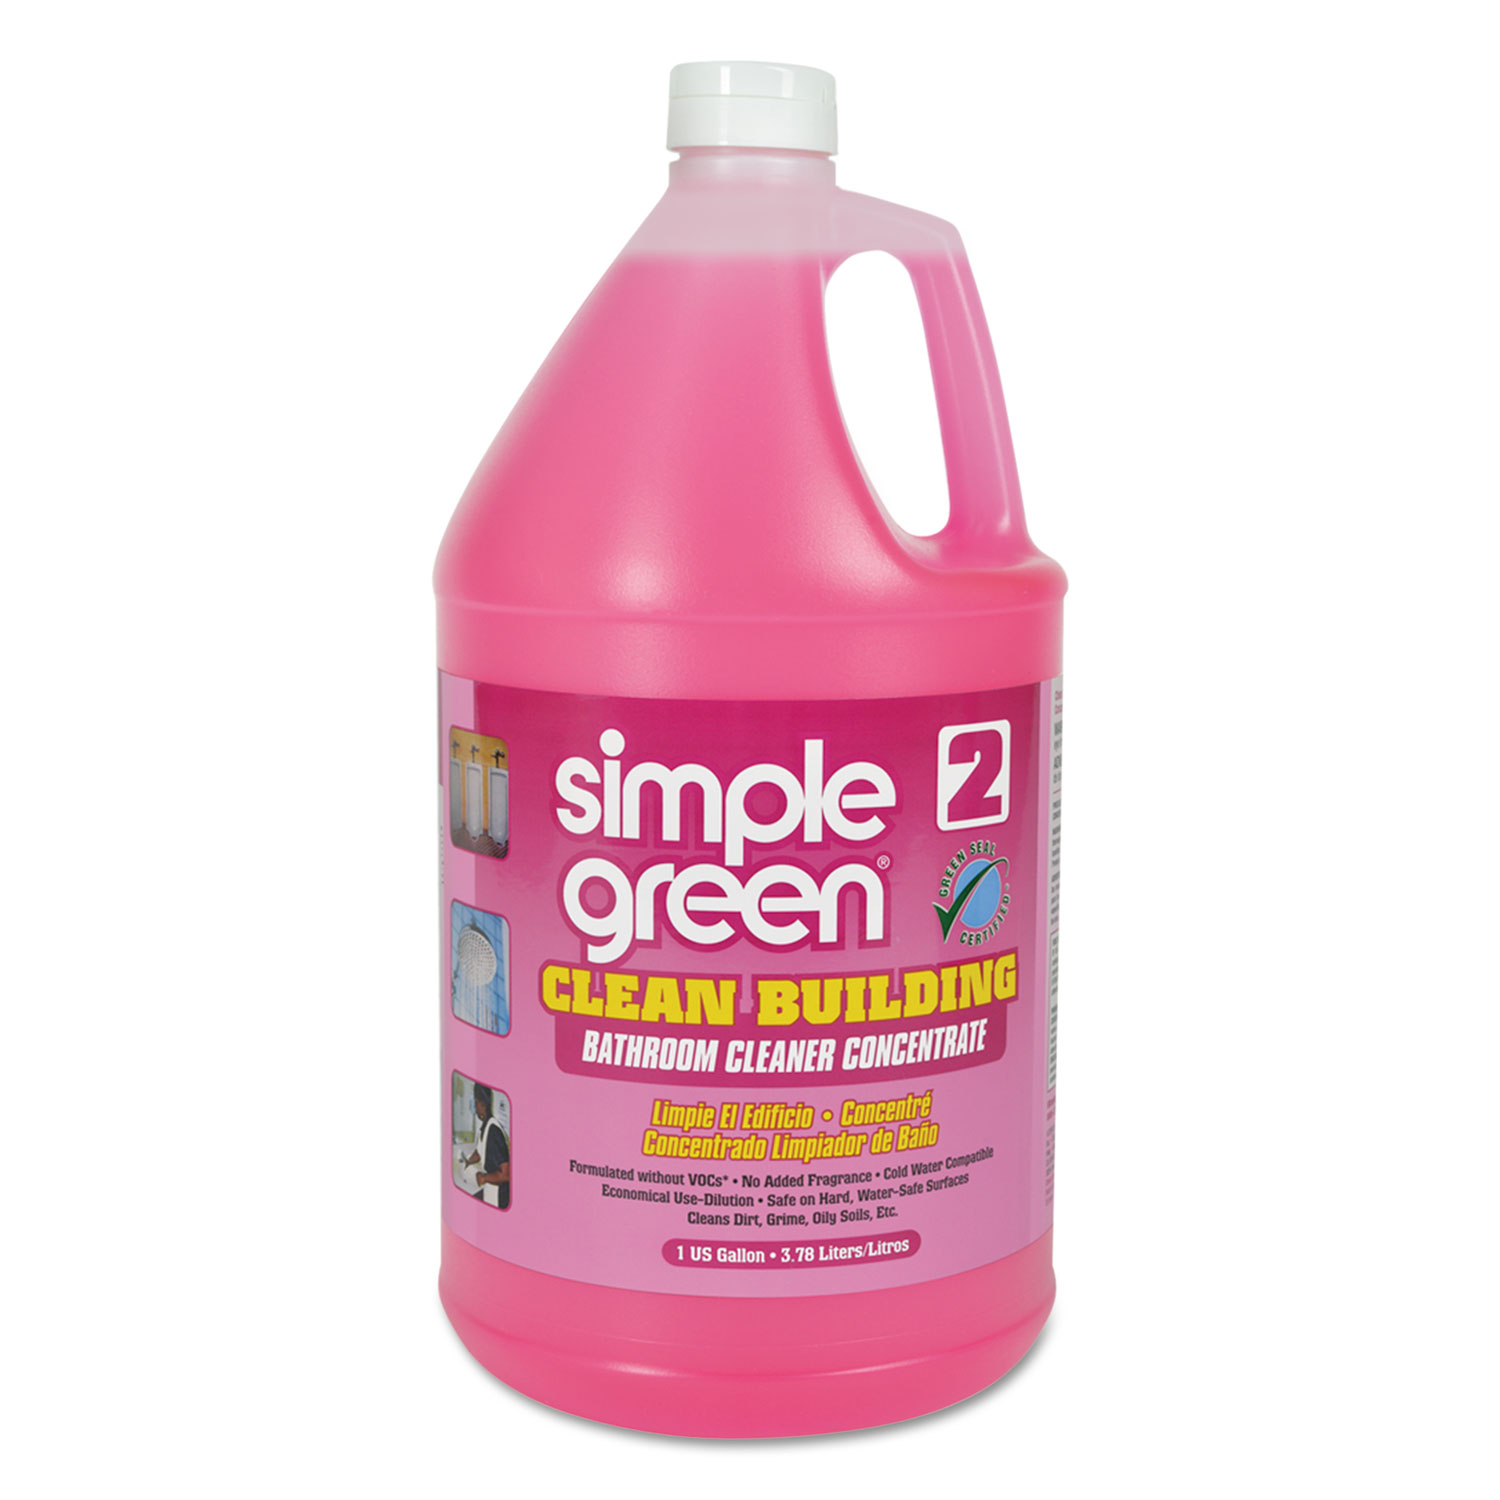 simple green SMP11101 Clean Building Bathroom Cleaner Concentrate, Unscented, 1gal Bottle